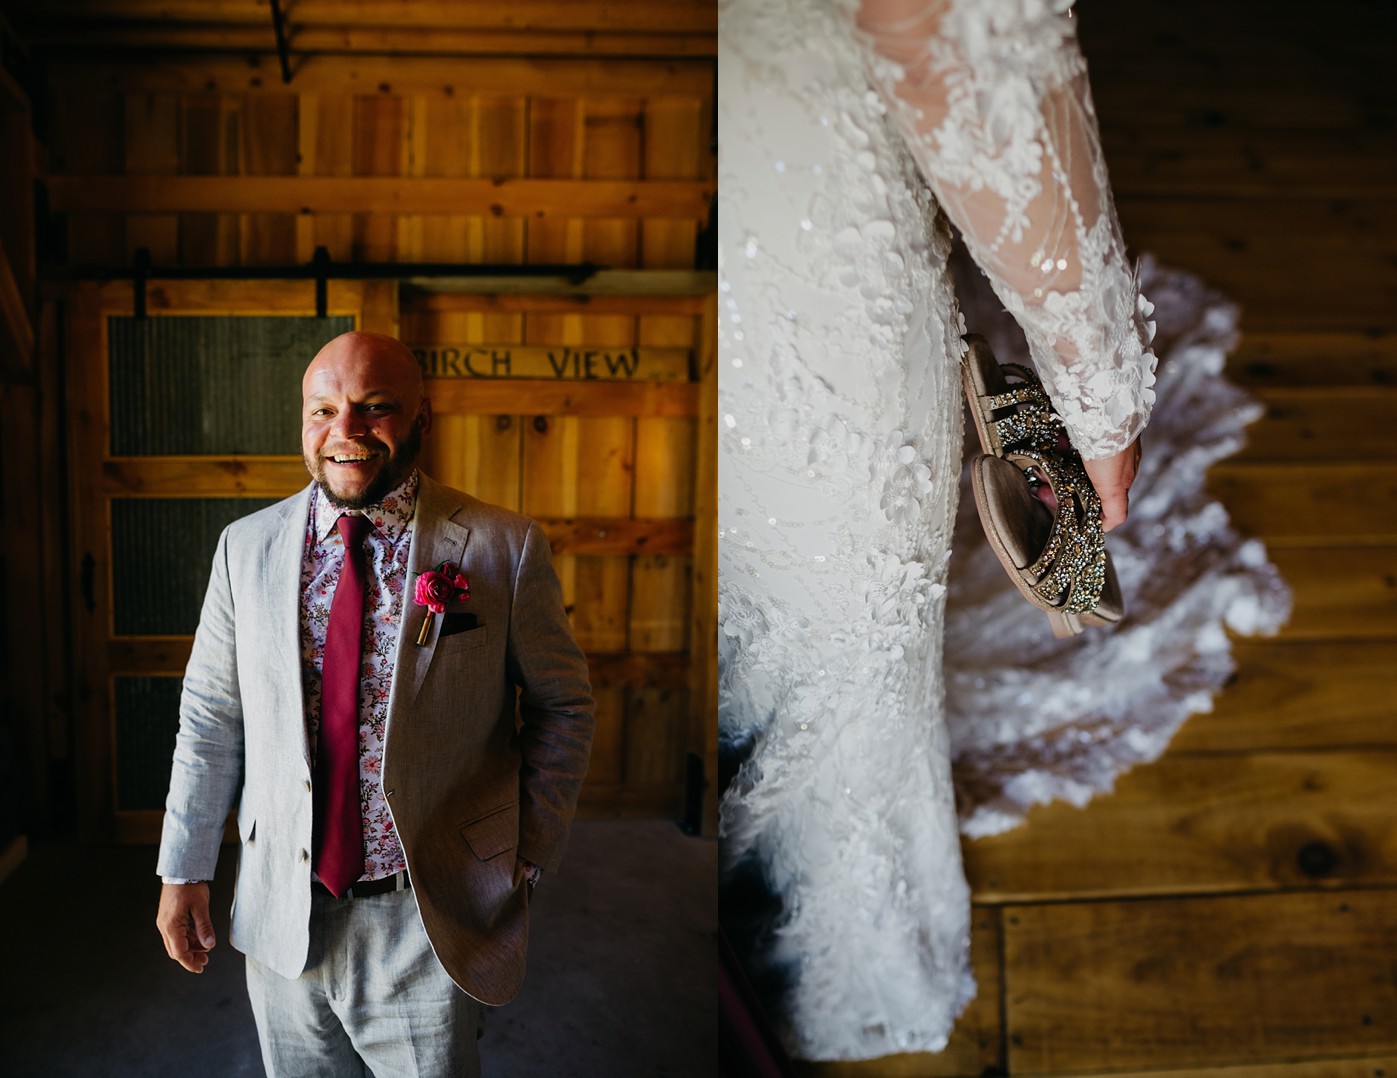 Anna & Reggie's Birchview outdoor wedding this summer was So-MUCH-FUN! Guys, the field, the barn, the colors, the smiles, the everything made their day exactly the way they wanted it to be.